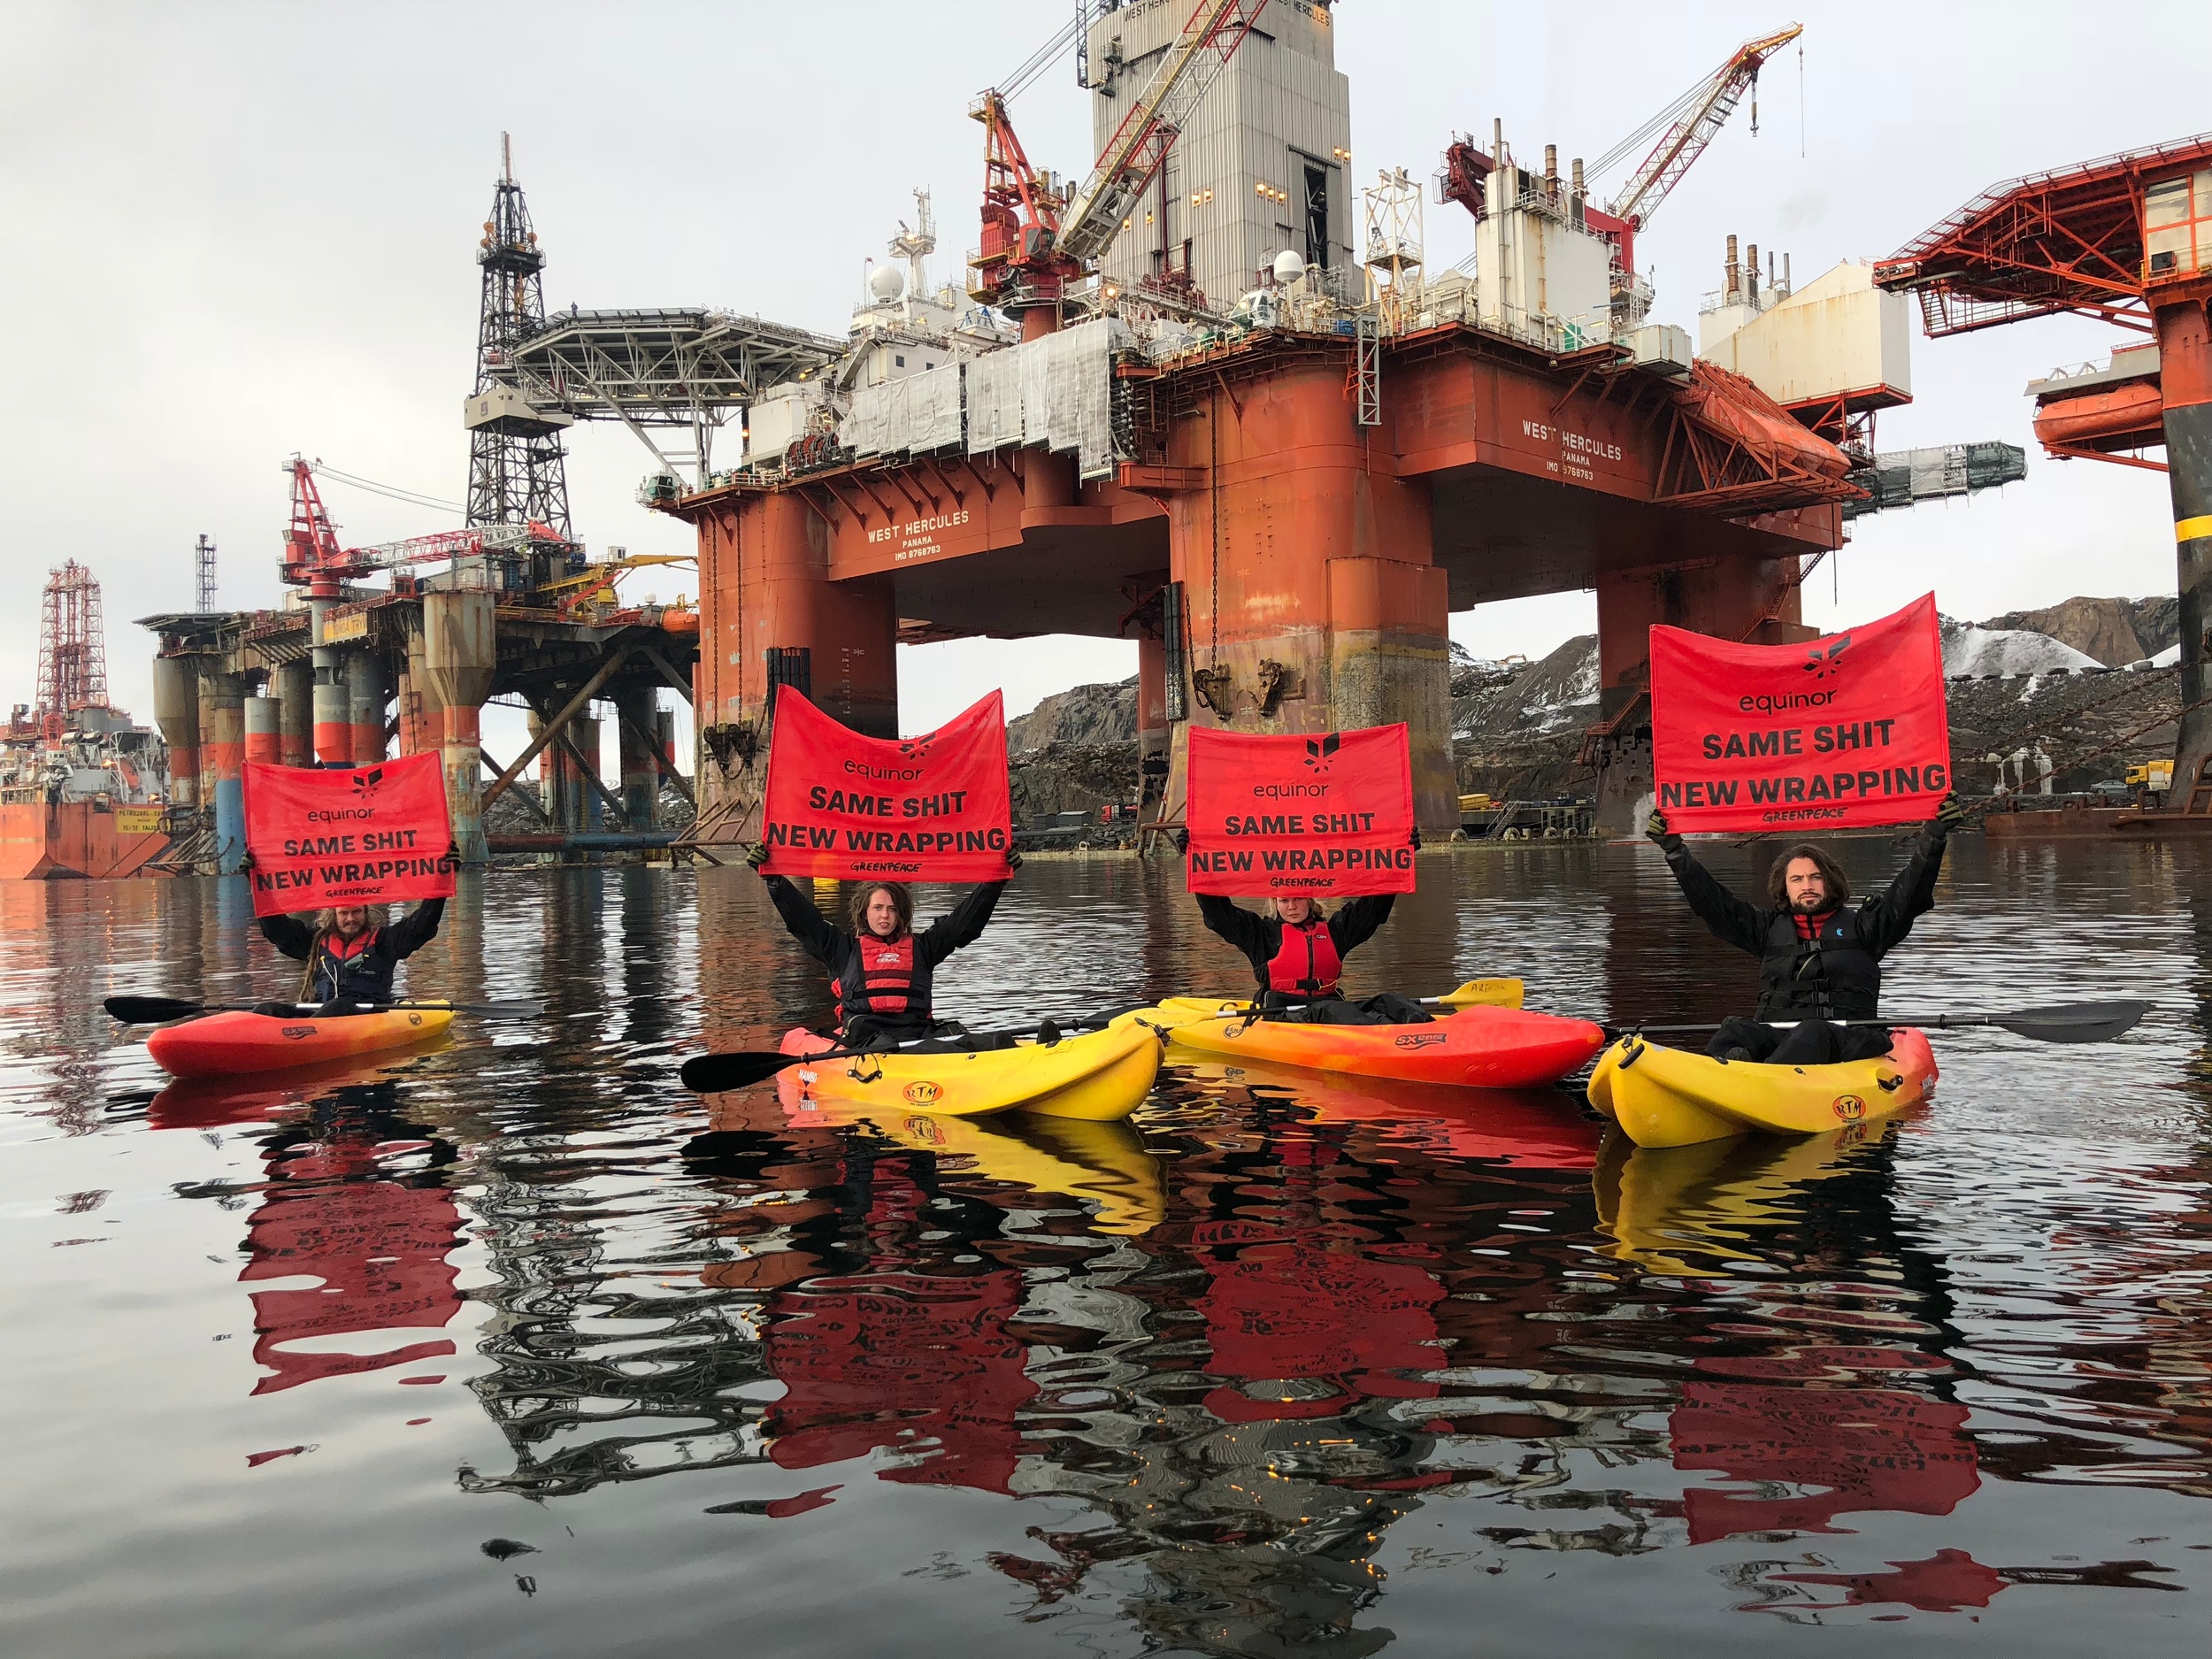 Protest against Arctic oil at Statoil Oil Rig in Norway © Greenpeace